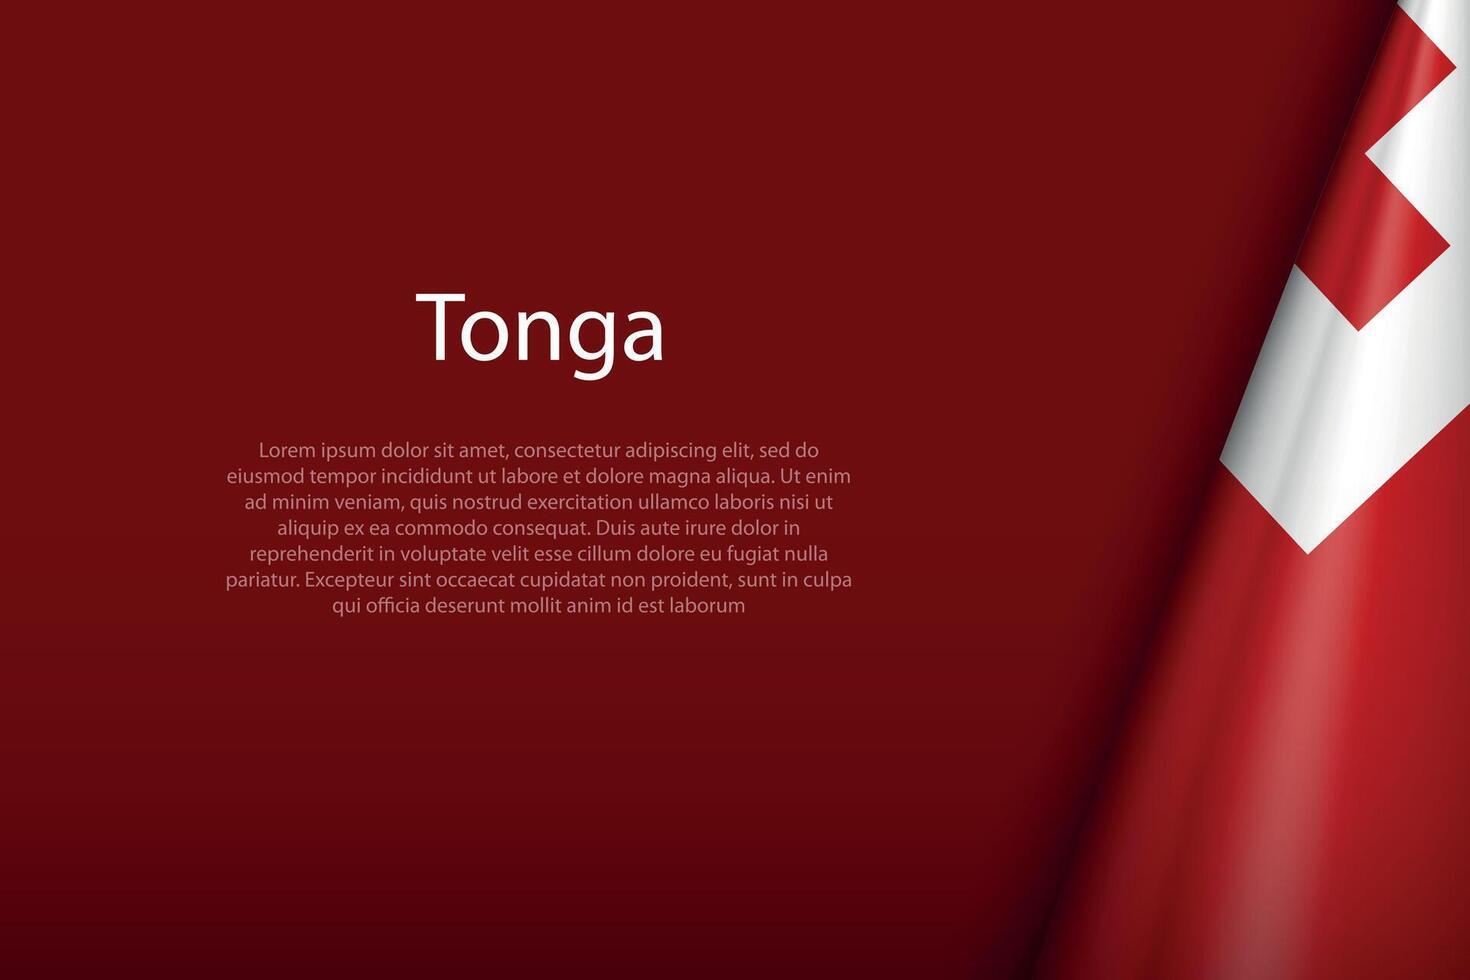 Tonga national flag isolated on background with copyspace vector